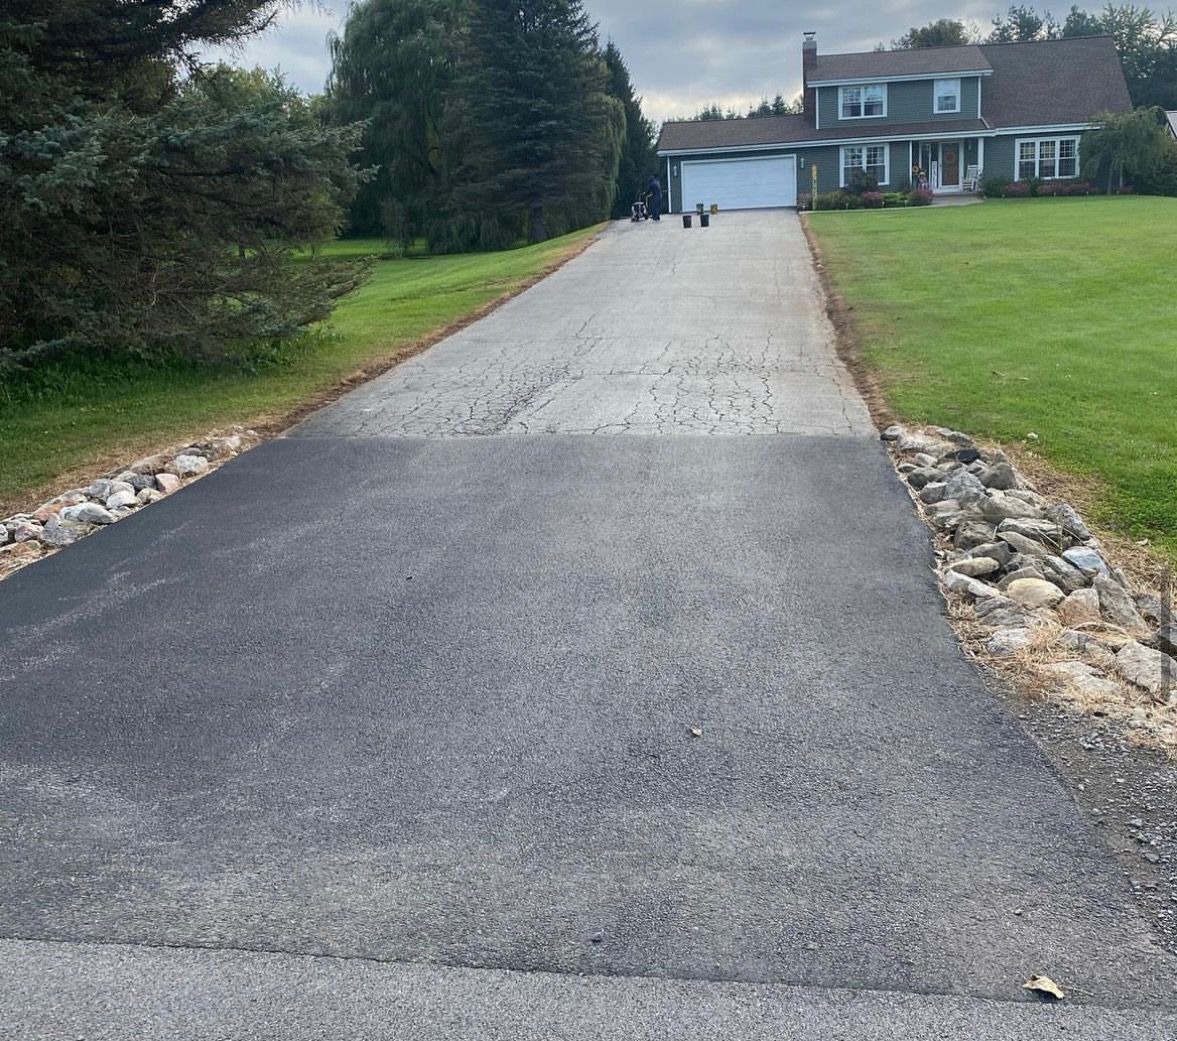 a driveway leading to a house with a garage